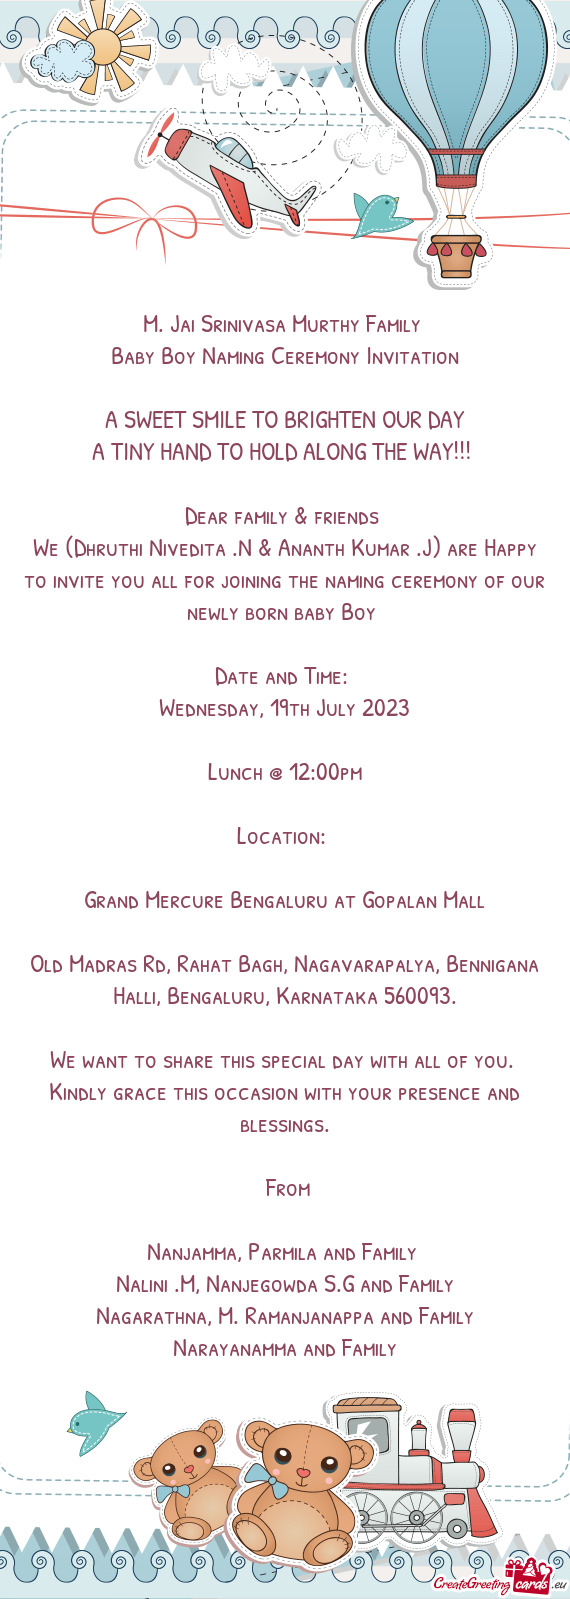 We (Dhruthi Nivedita .N & Ananth Kumar .J) are Happy to invite you all for joining the naming ceremo